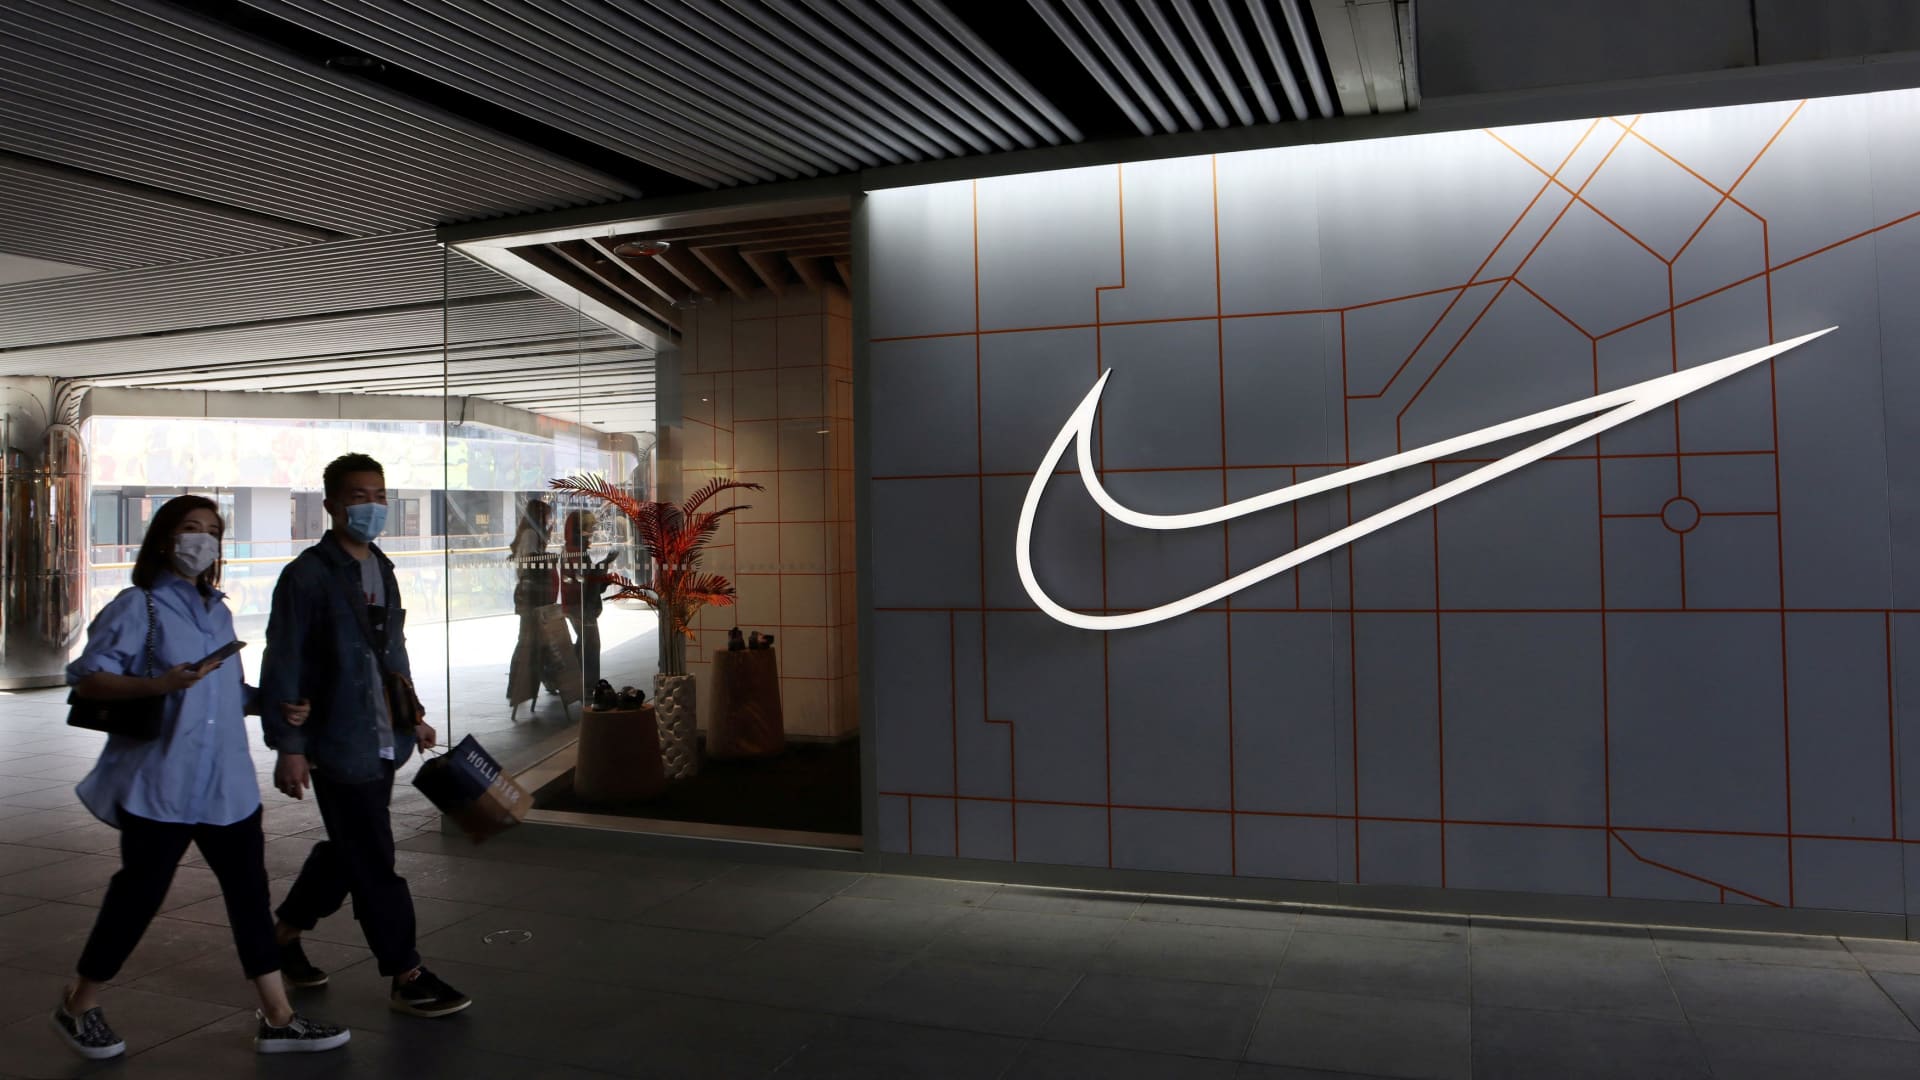 Stocks making the biggest moves midday: Nike, La-Z-Boy, Altria Group, Coinbase, Dow & more